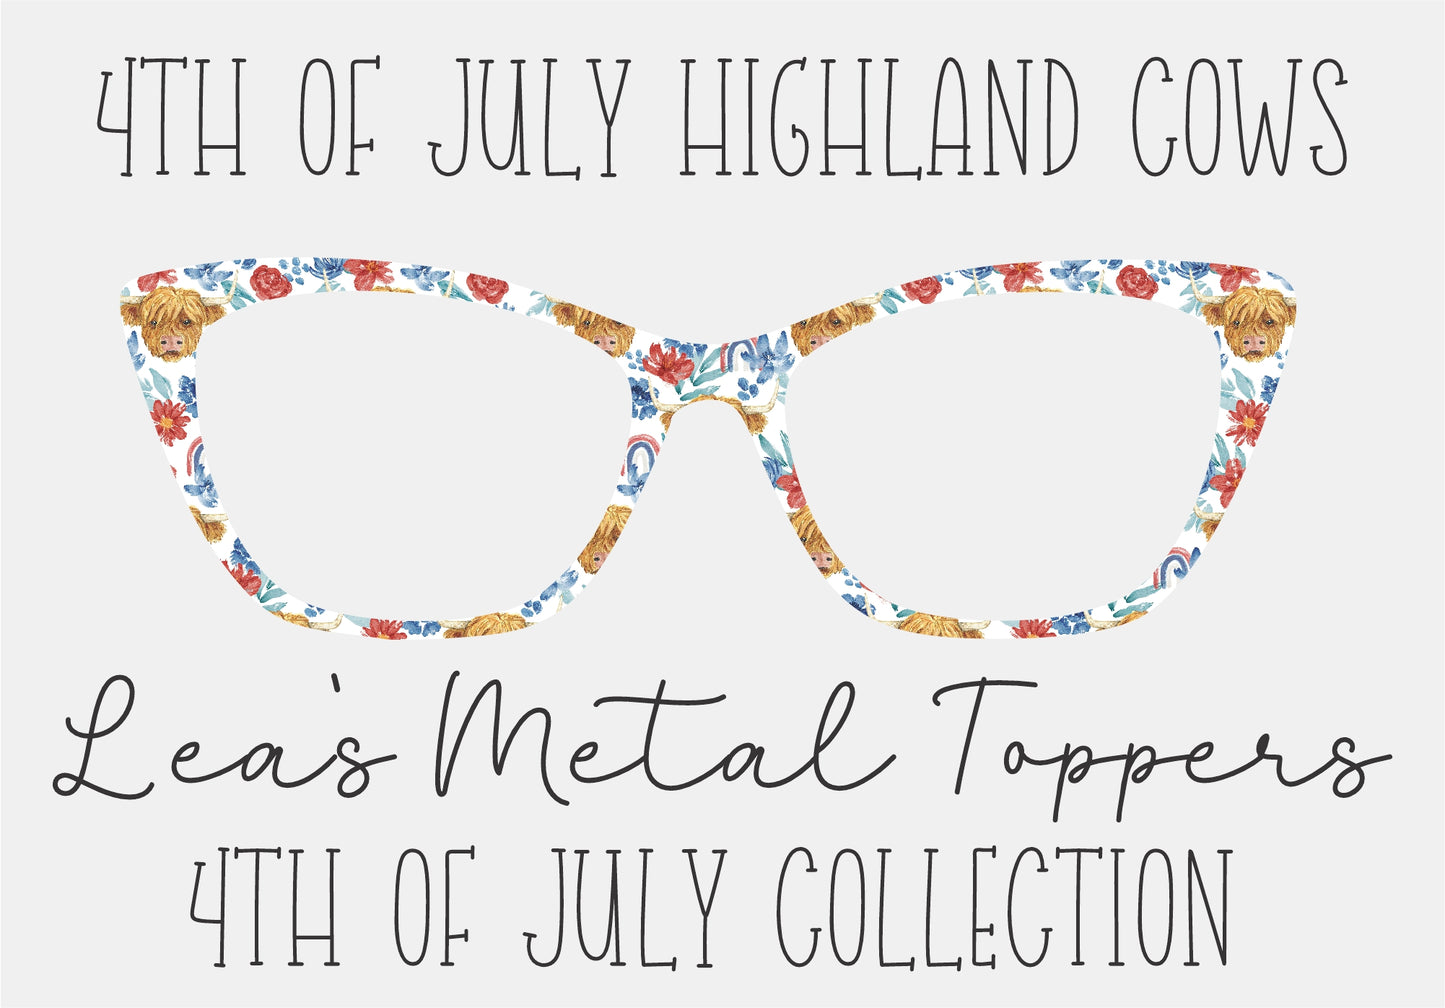 4TH OF JULY HIGHLAND COWS Eyewear Frame Toppers COMES WITH MAGNETS